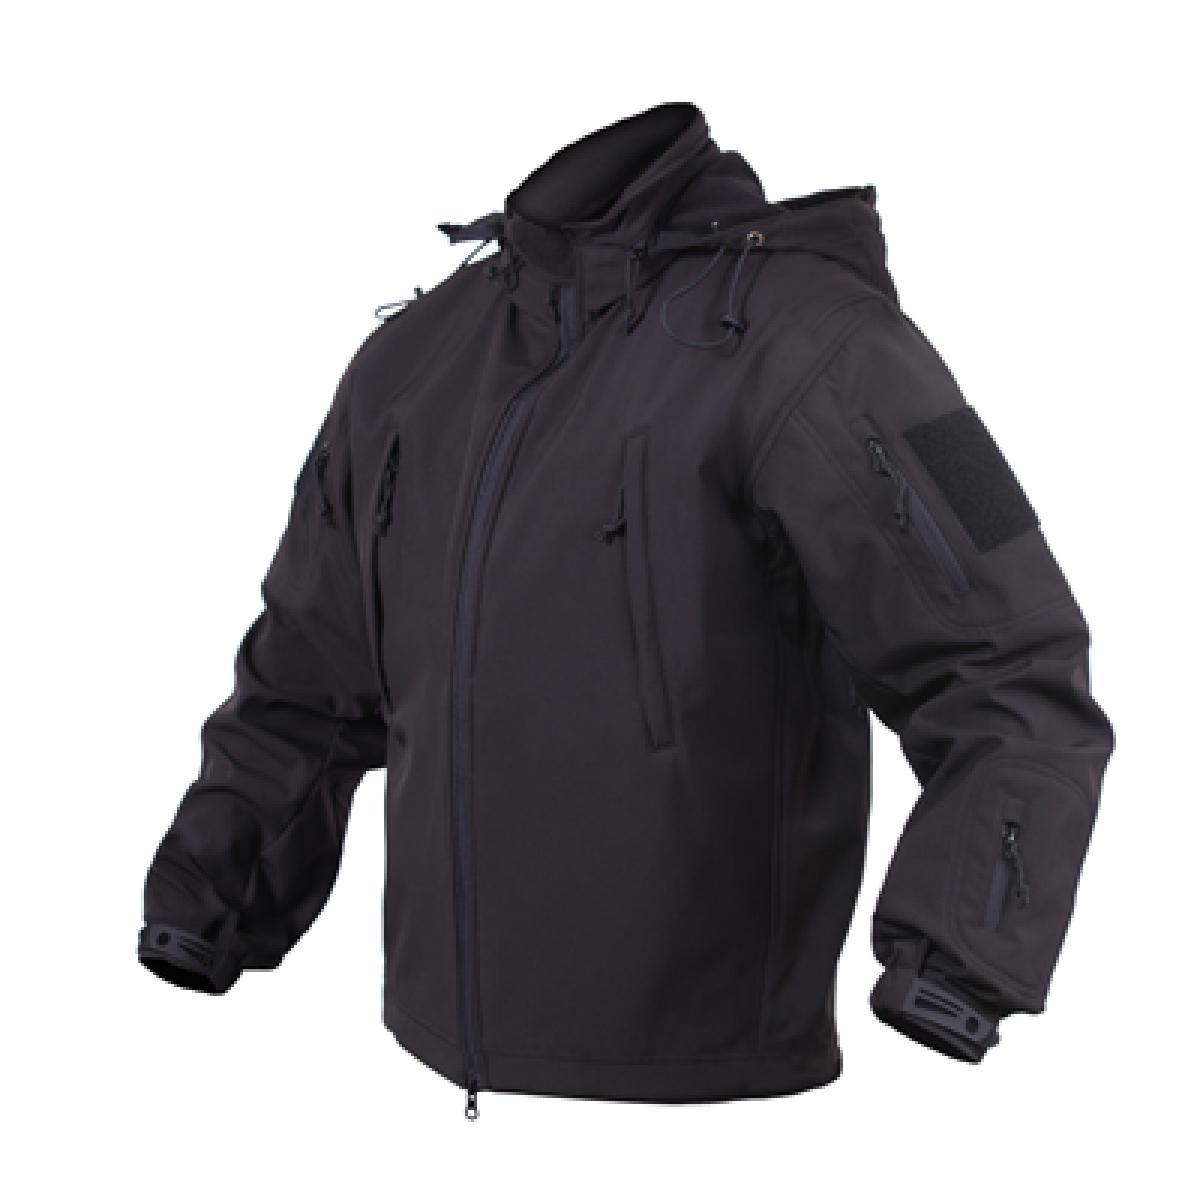 Rothco Concealed Carry Waterproof Soft Shell Jacket | eBay